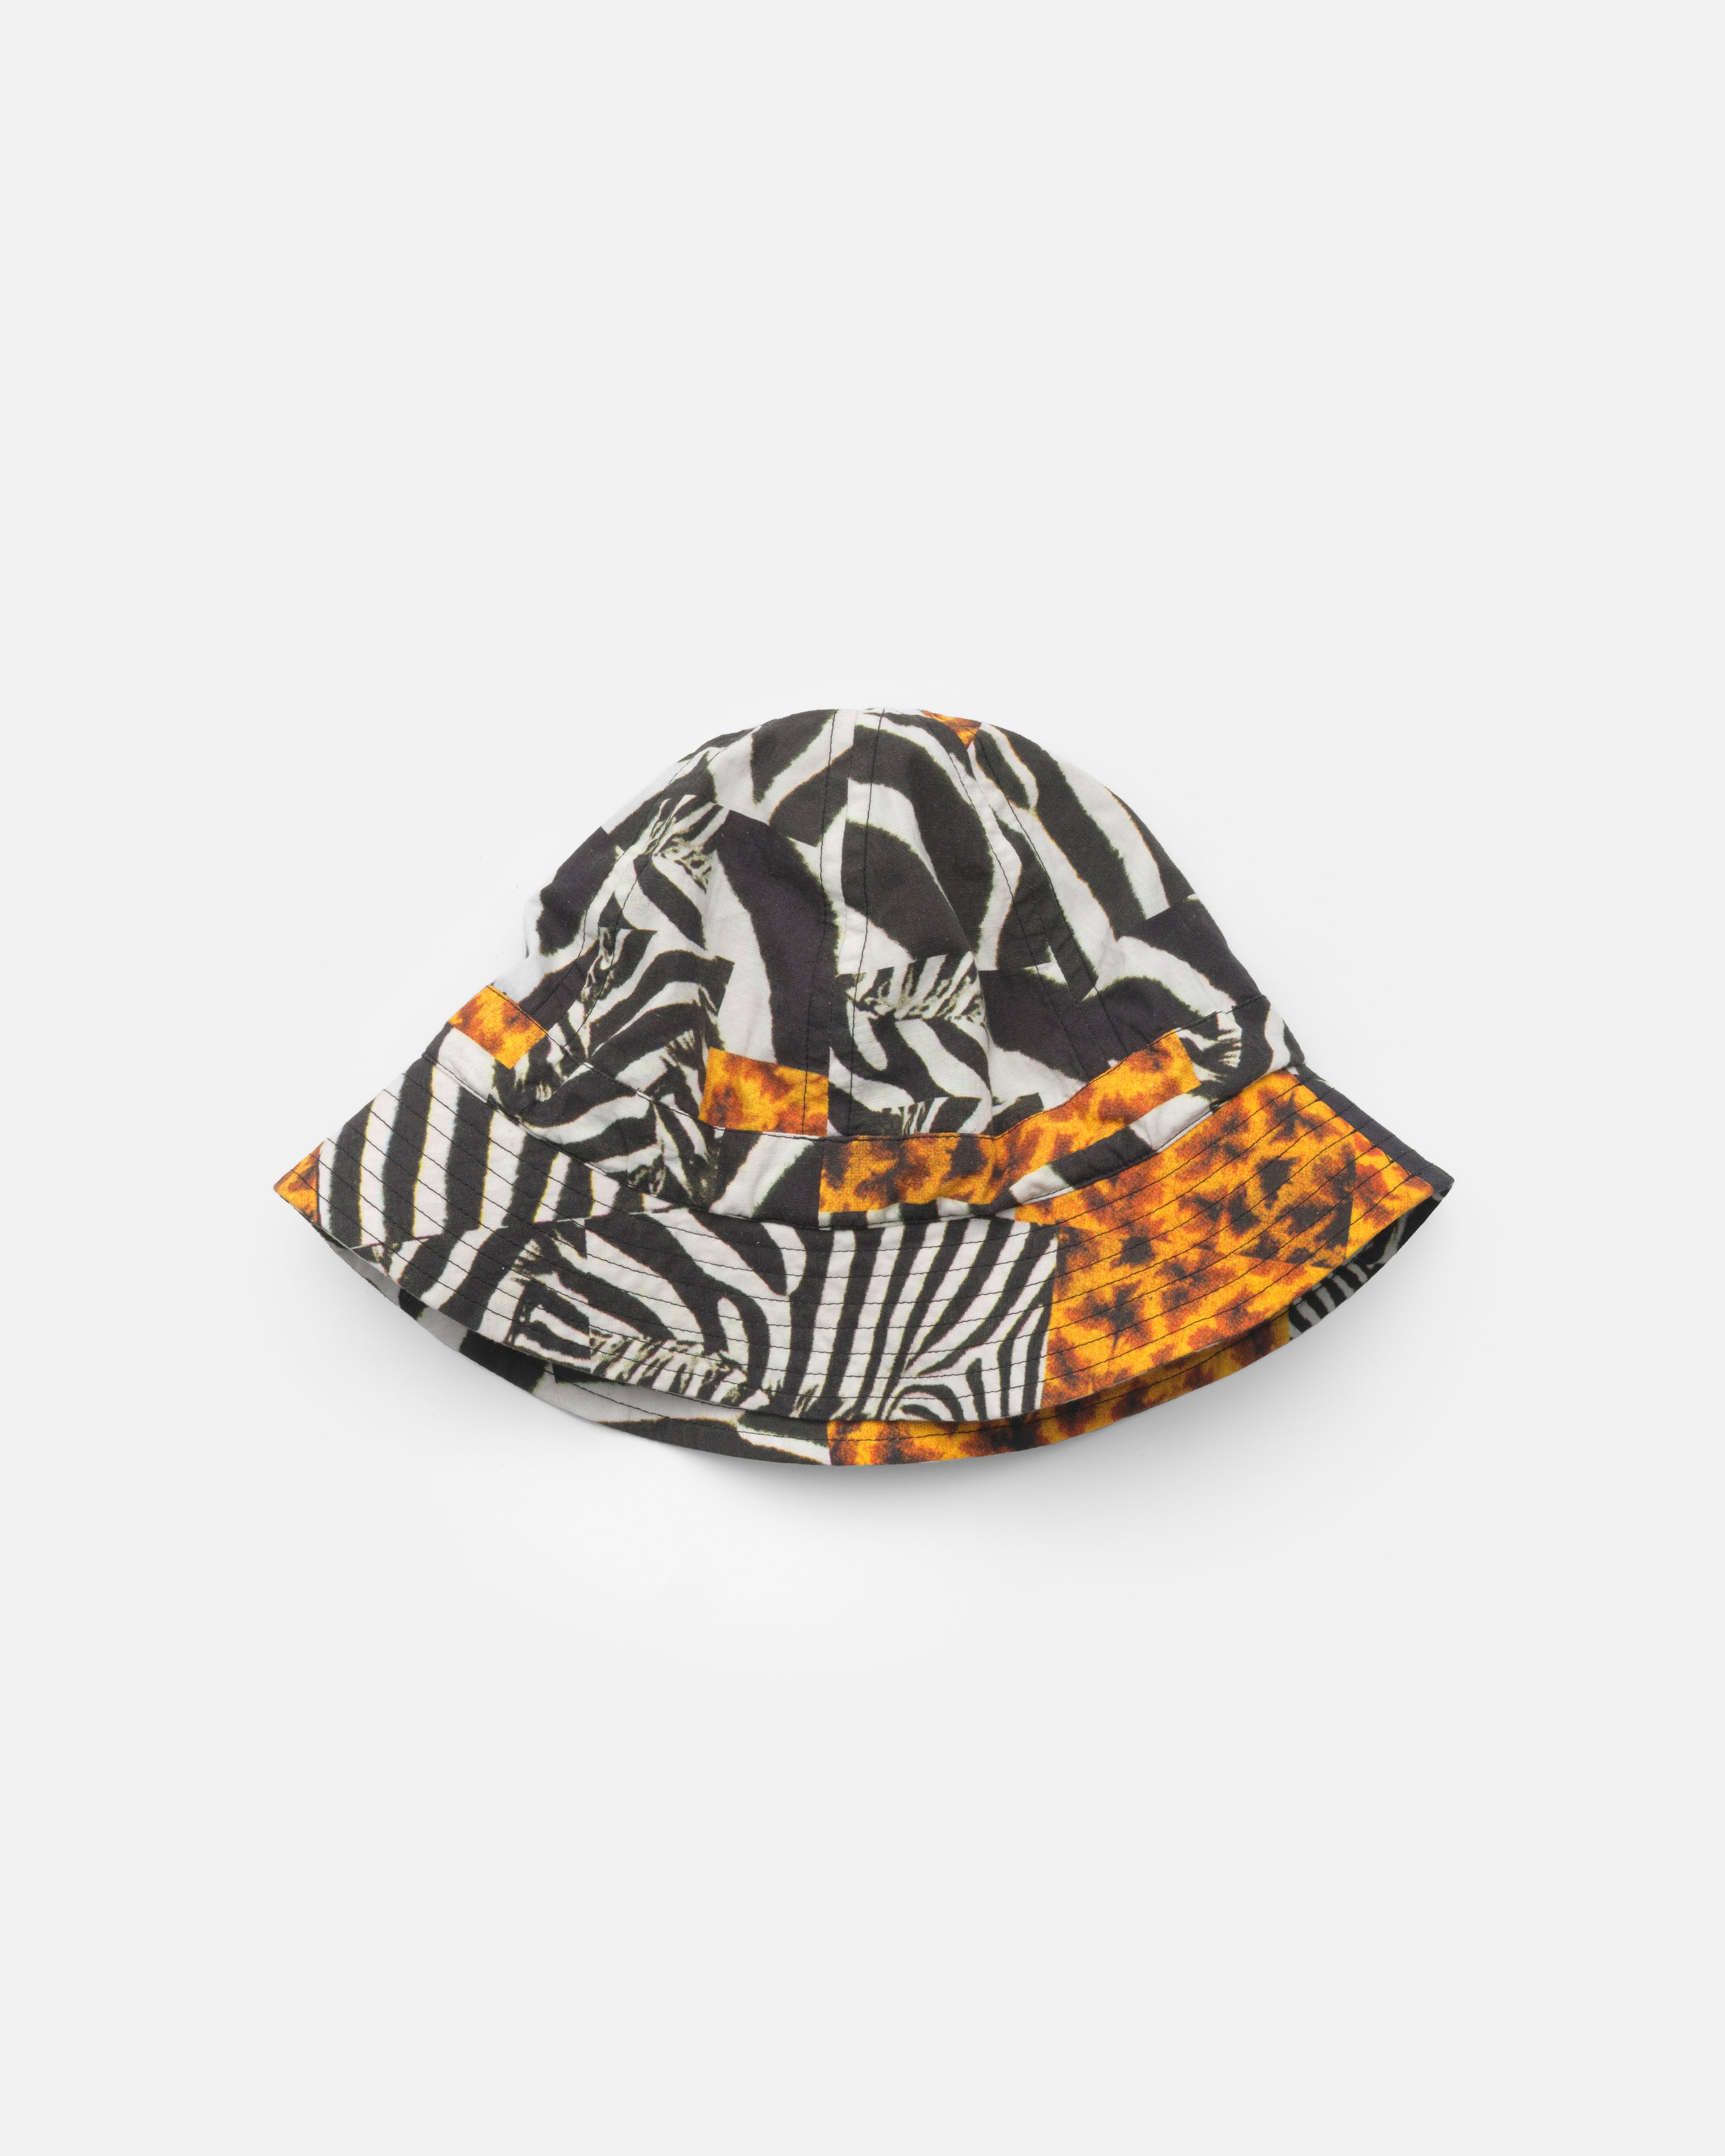 PARKER DAISY MAE BUCKET HAT - LOVELY ANIMAL PATCHWORK COTTON